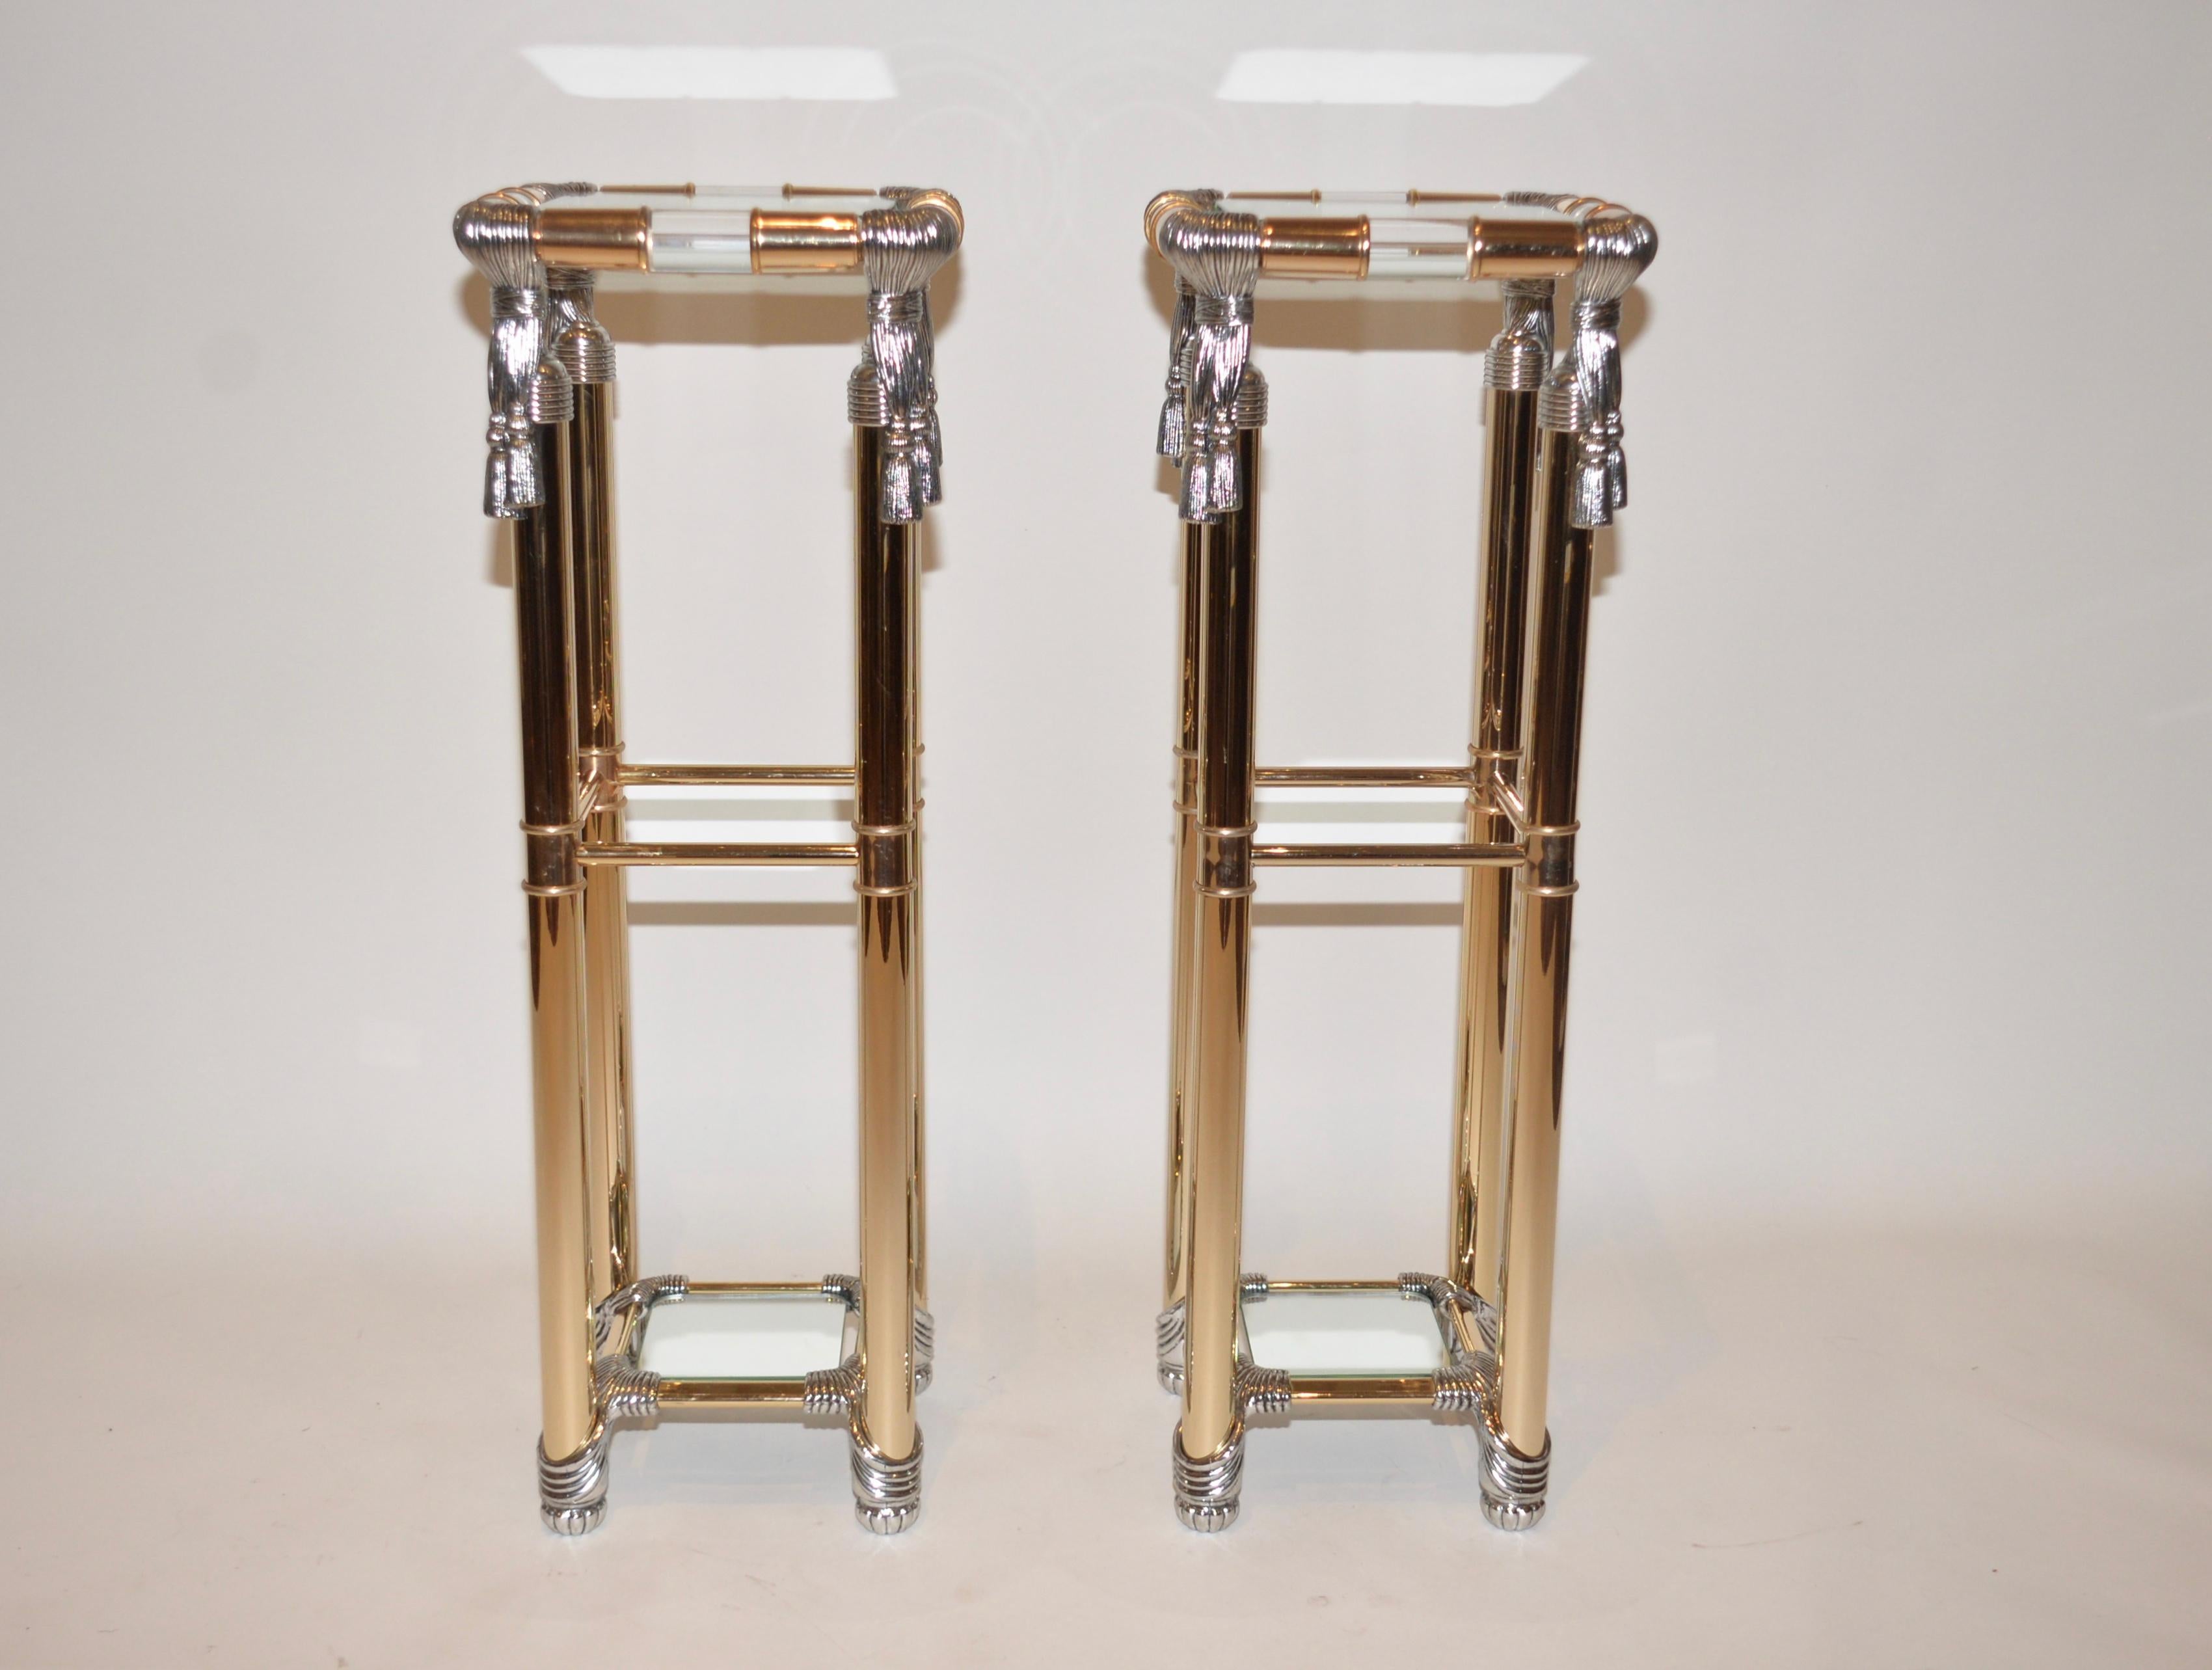 A pair of vintage Curvasa Meubles Hollywood Regency style pedestal stands. Lucite and gold with silver rope detailing on each corner. Very striking items which have the designers attribution label stamped on them.
  